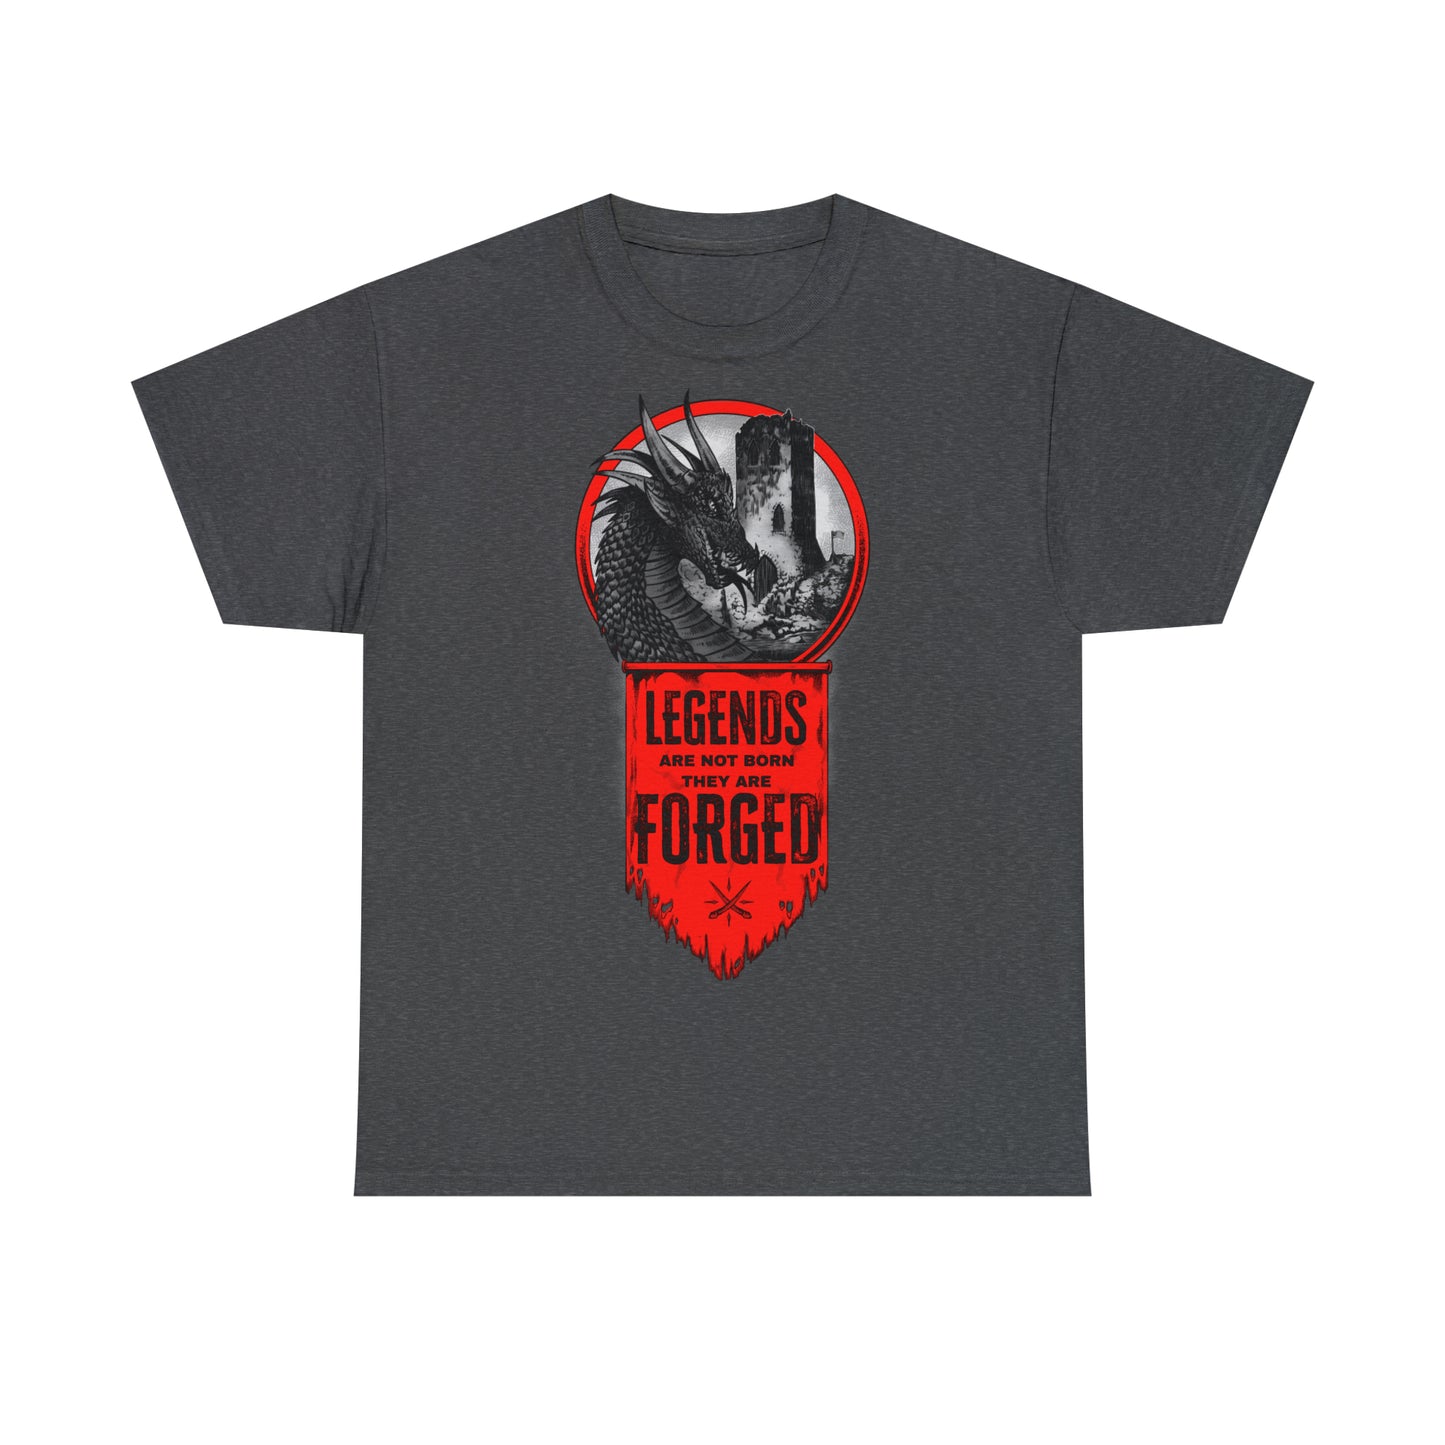 Legends 'A Kingdom Of Courage And Cruelty' Unisex T